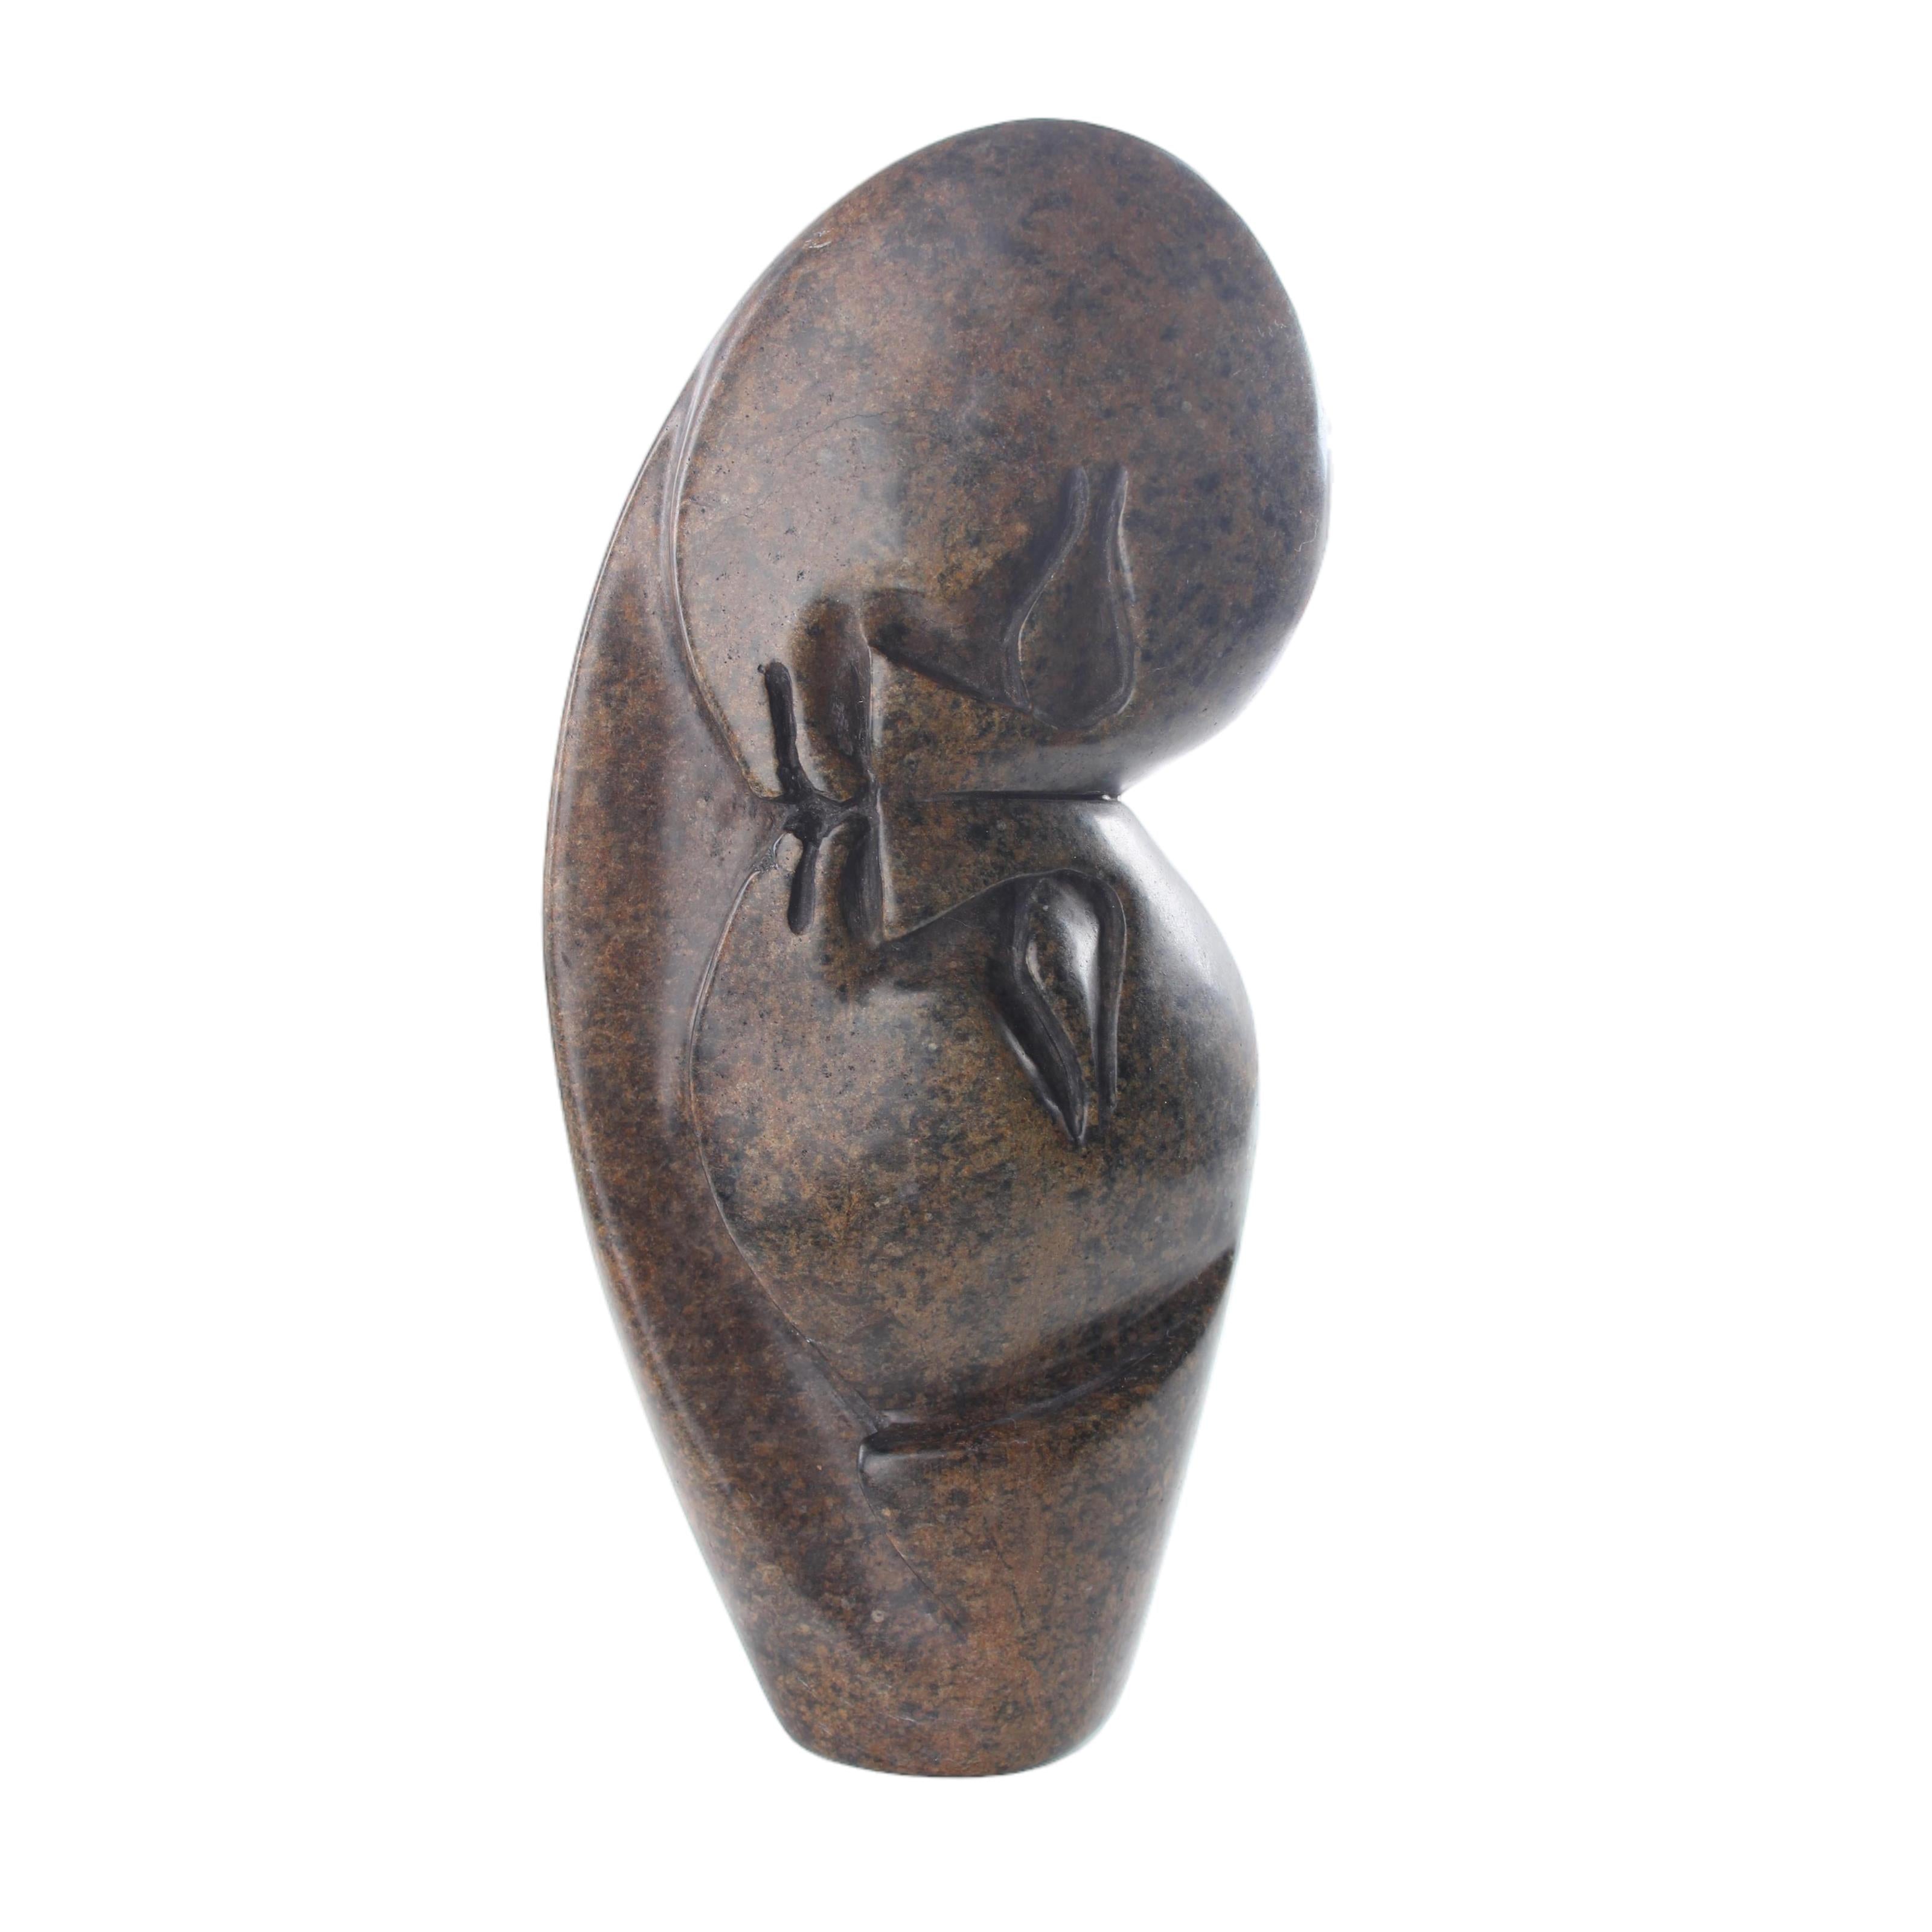 Shona Tribe Serpentine Stone Lovers ~9.8" Tall - Lovers